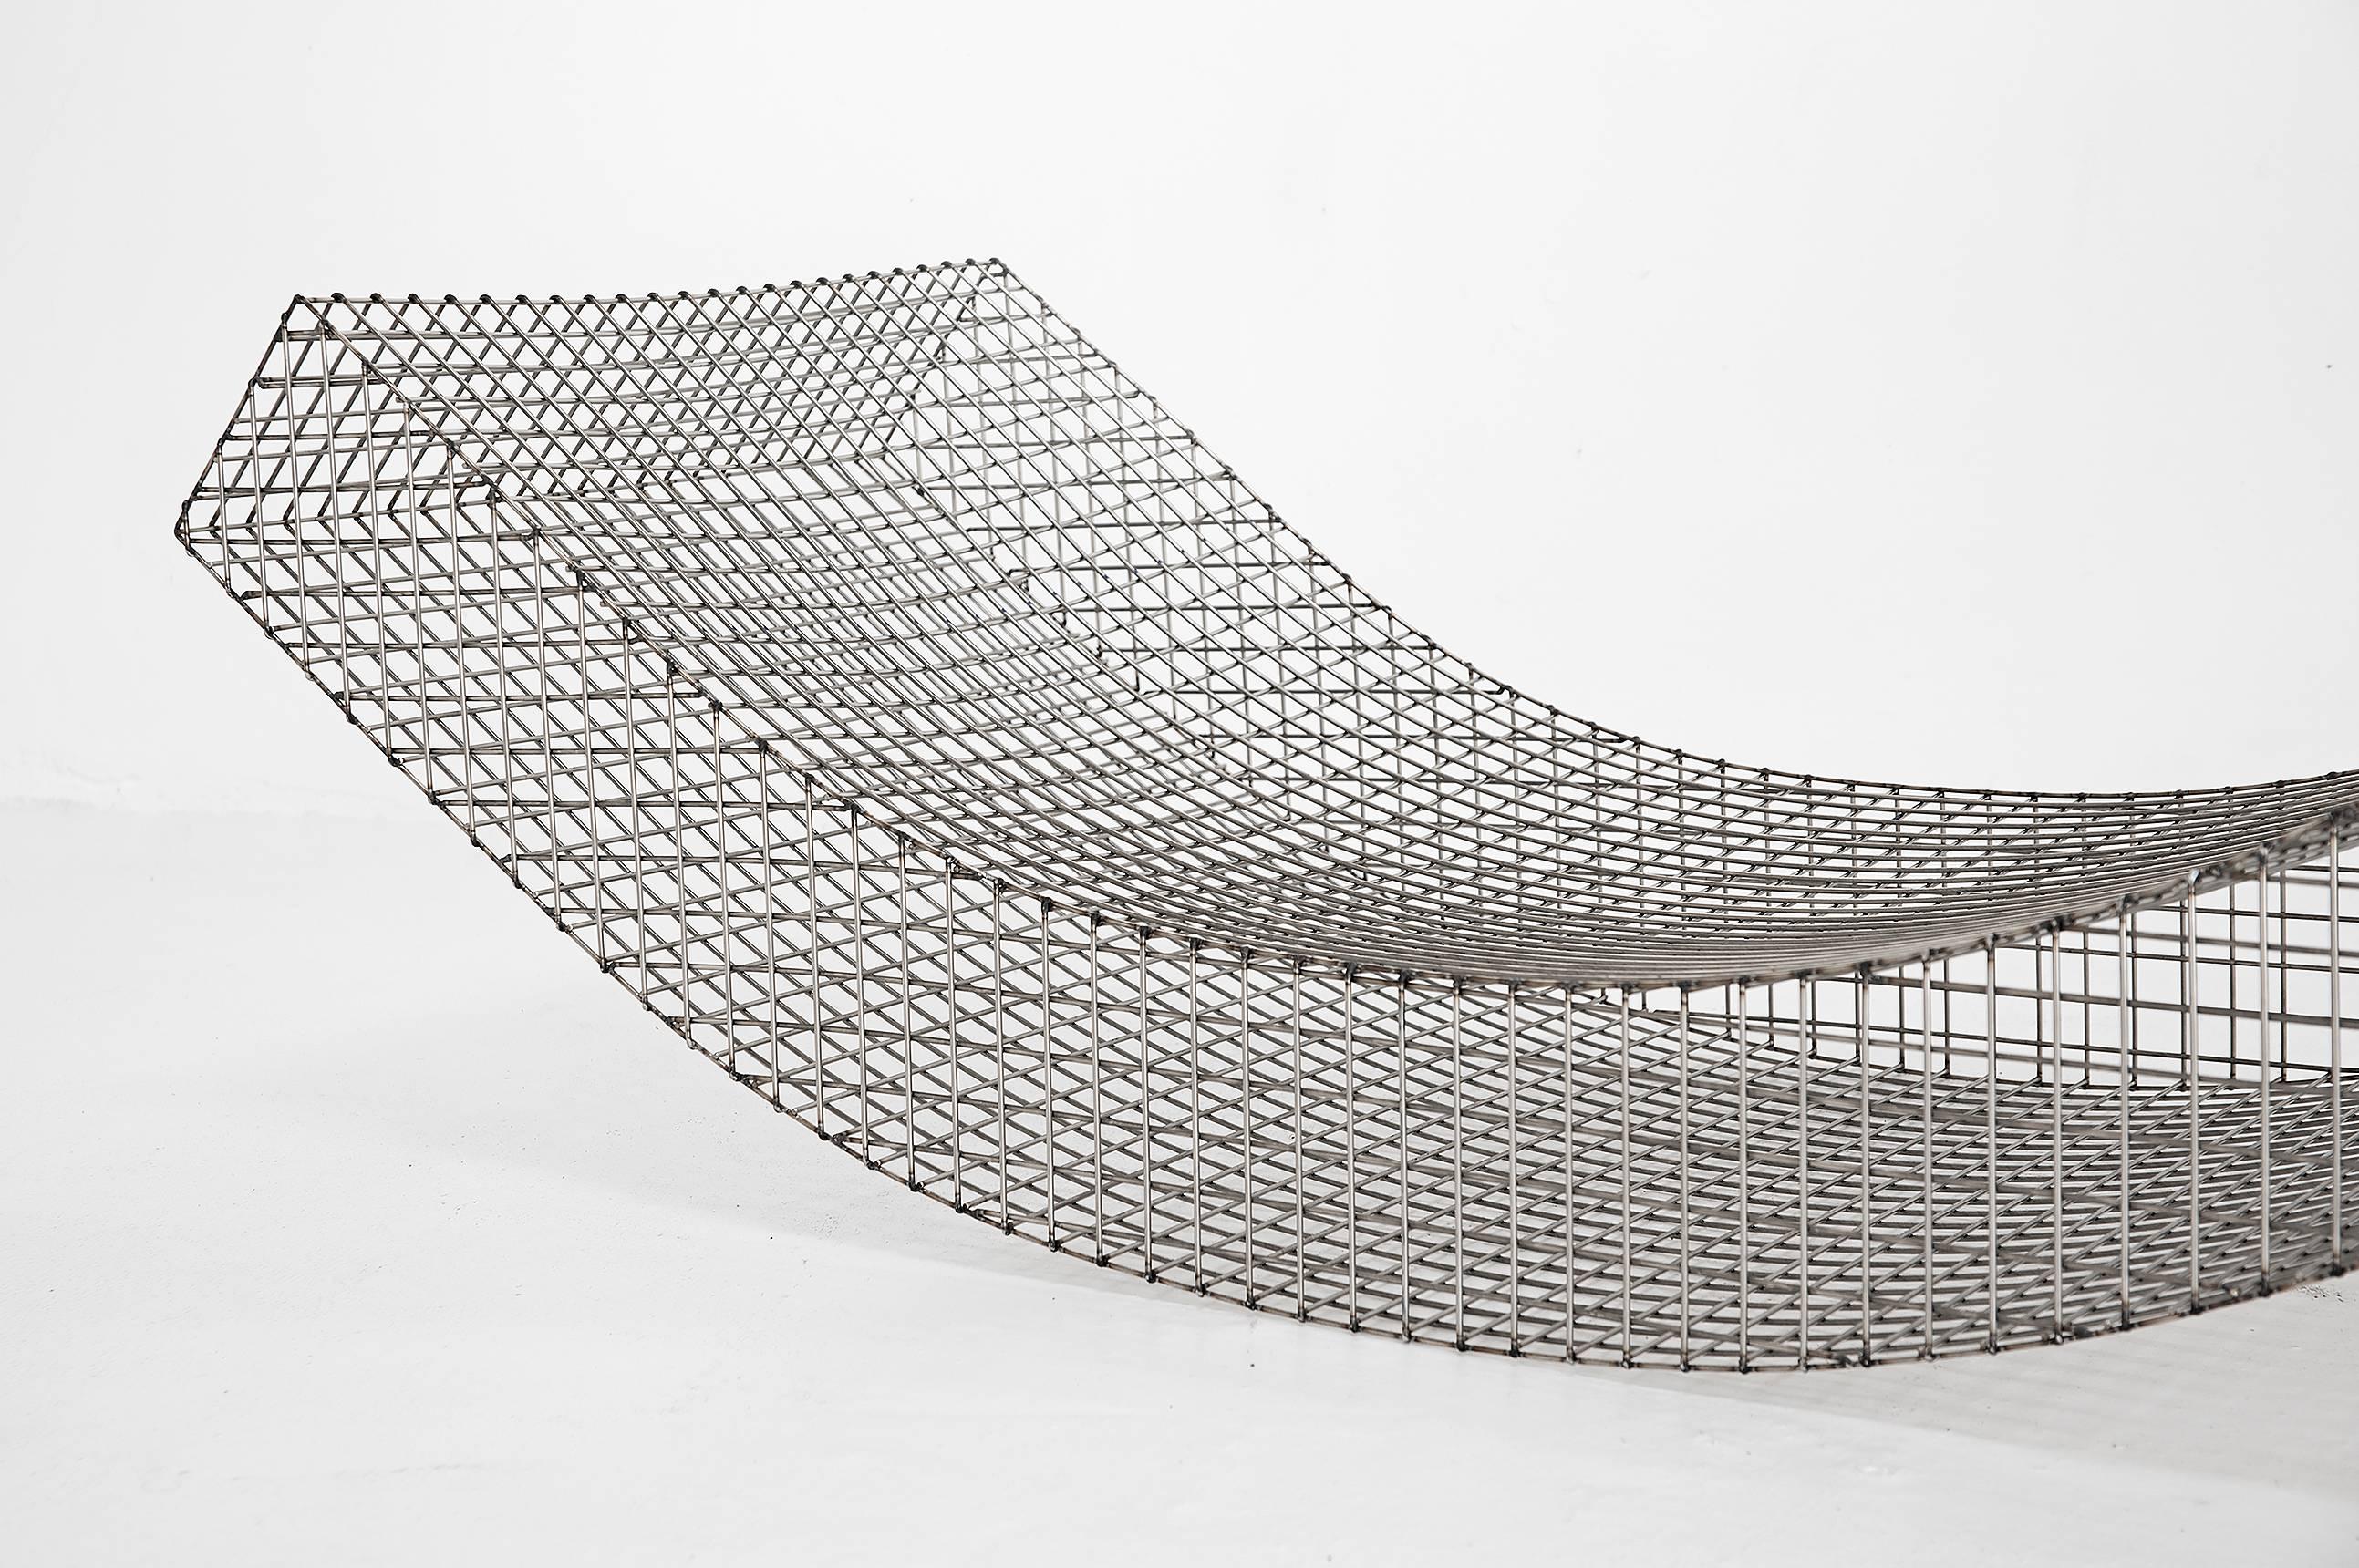 Muller Van Severen

Outdoor lounge chair model “Wire S #1”
Manufactured by Muller Van Severen
Produced for Side Gallery
Stainless steel

Measurements
139 cm x 60 cm x 37 H cm
54.7 in x 23.6 in x 14.5 H in

Edition
Open